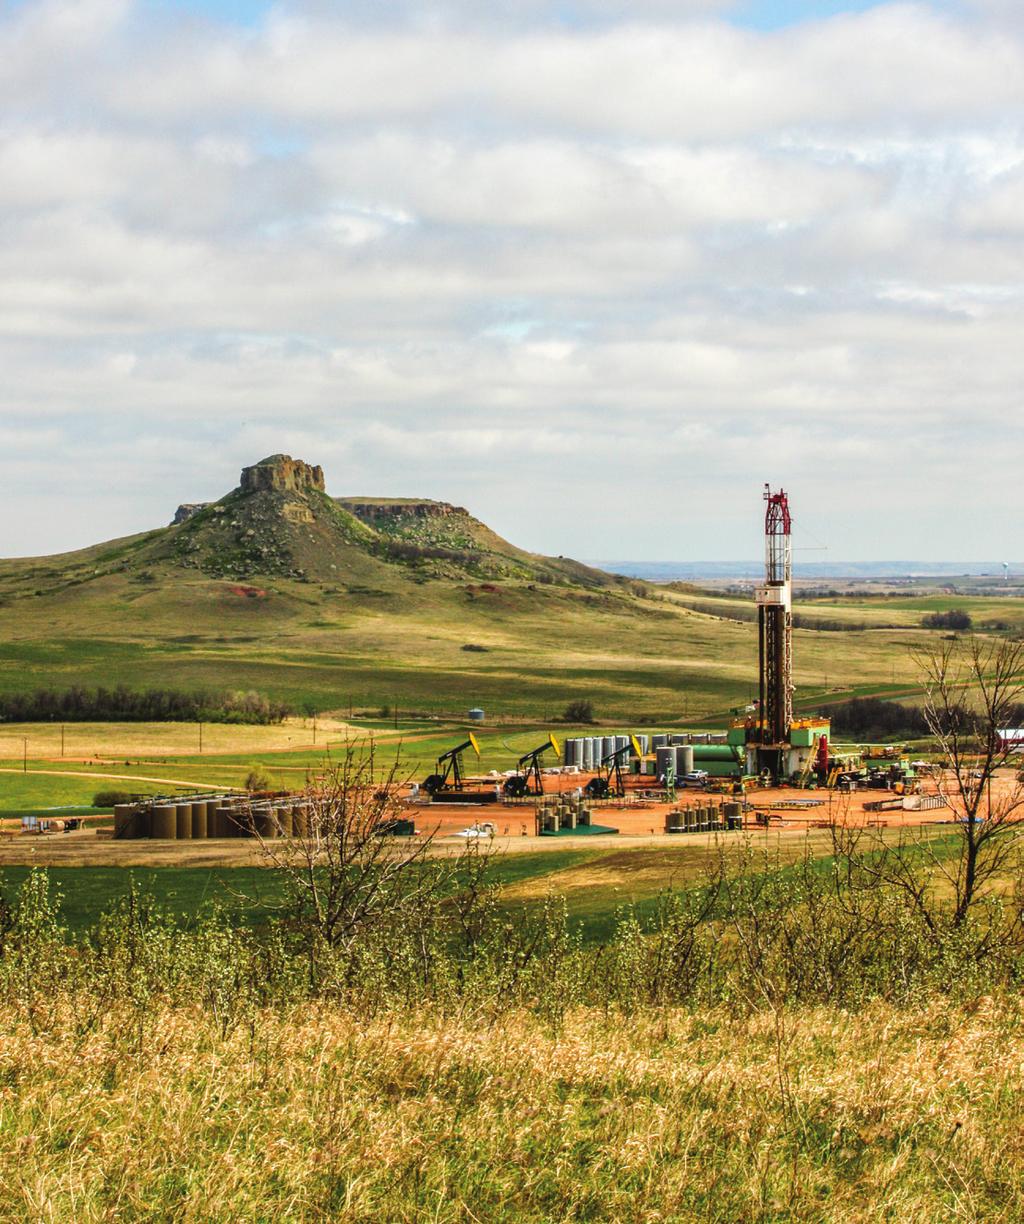 AN AUTOMATED FUTURE: Hess believes that automated controls are the solution to remotely operate thousands of wells in the Bakken.